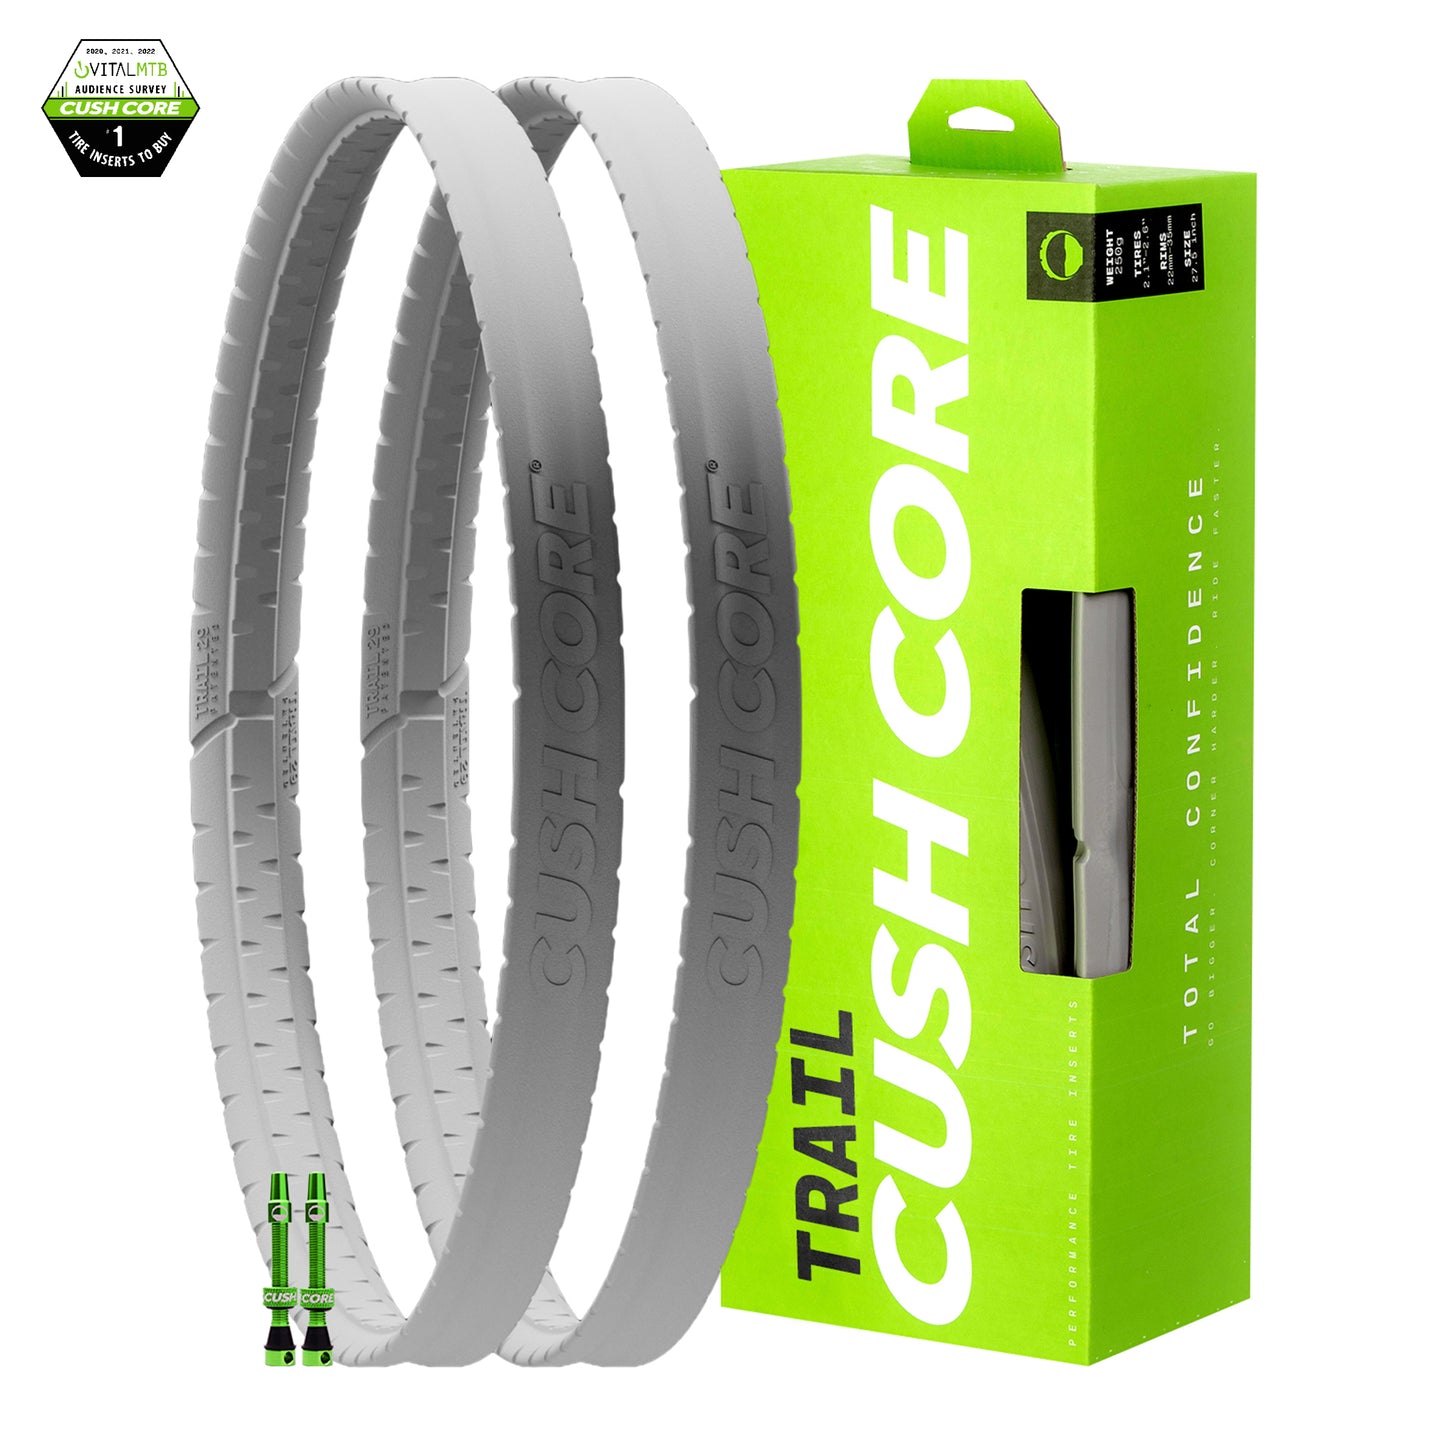 CushCore Trail Inner Tyre Suspension System - 29 Inch - Pair